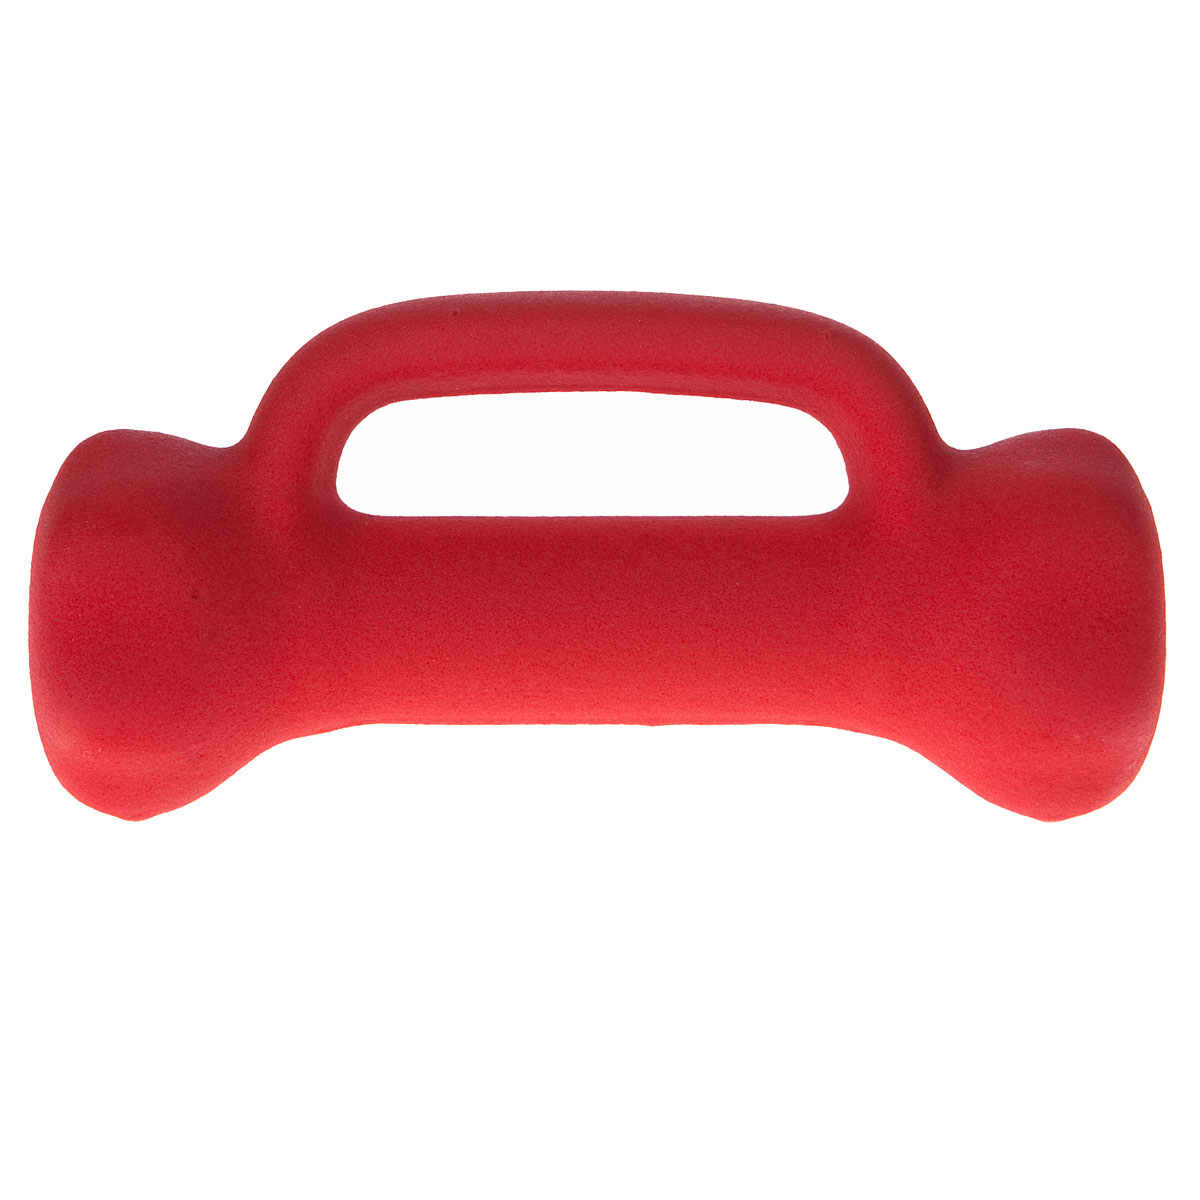 ONE-HAND WEIGHT 3 KG WITH A GRIP - One-hand weight